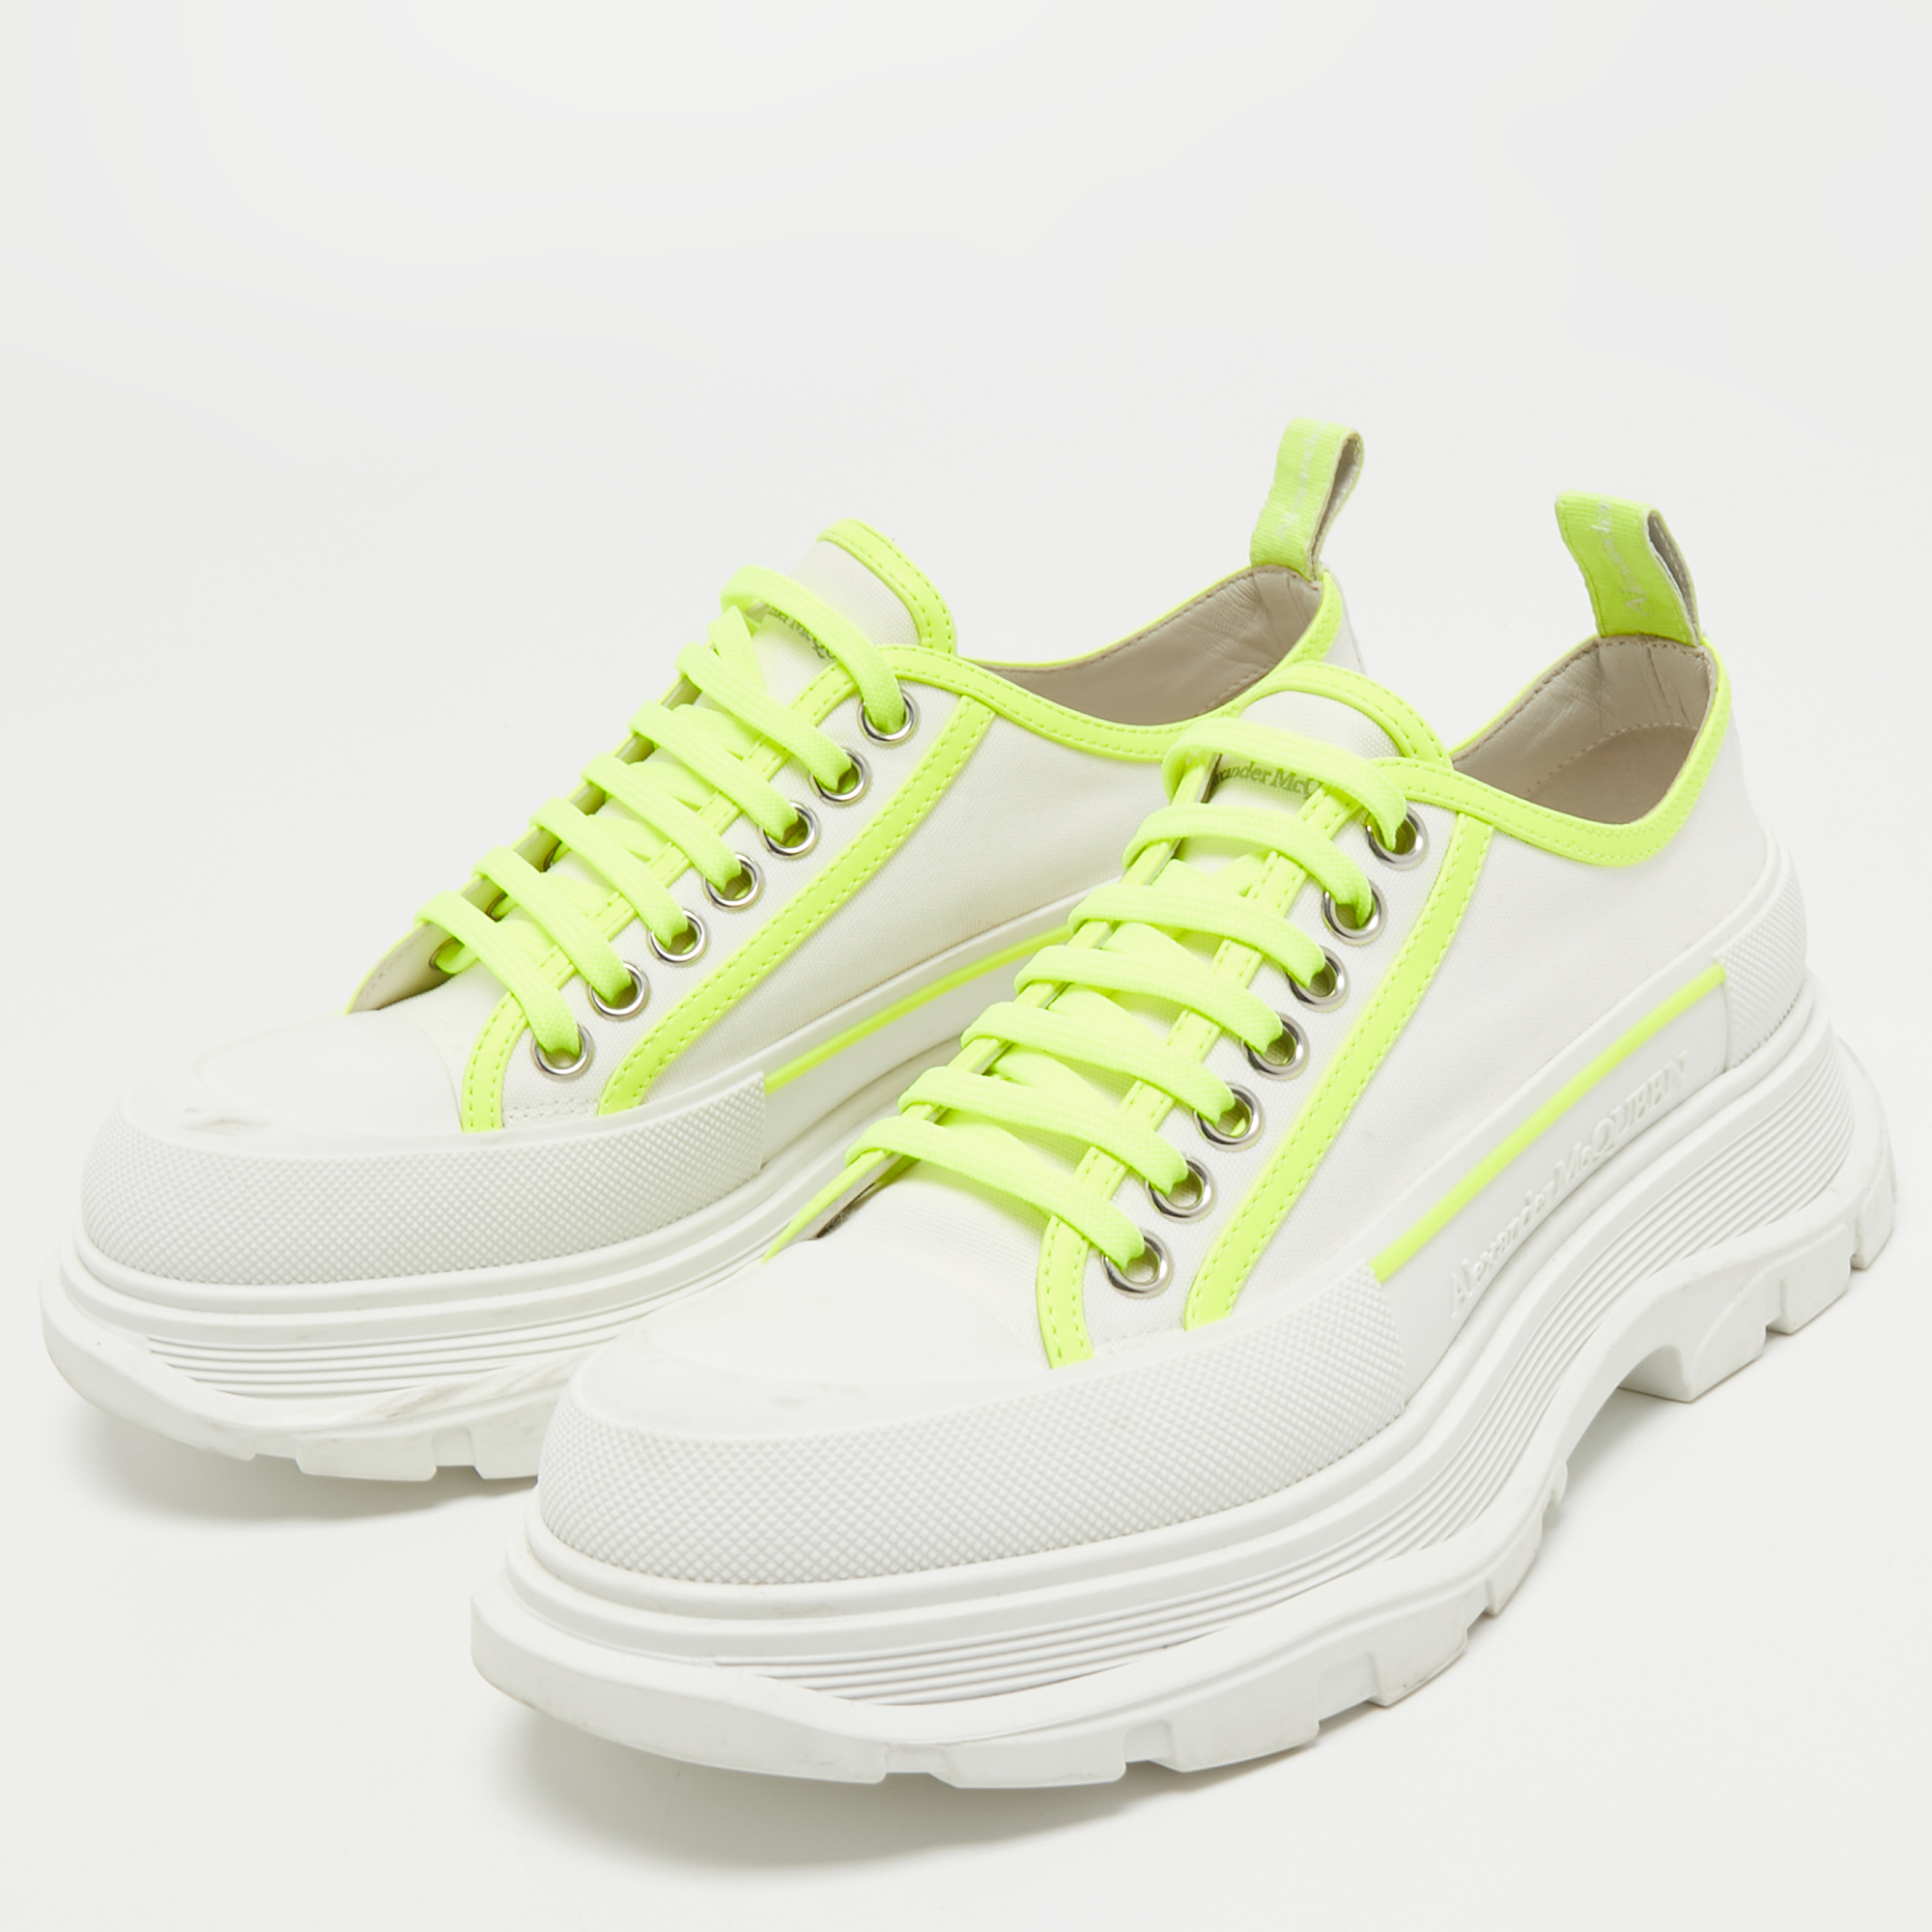 

Alexander McQueen White/Neon Green Canvas and Rubber Slick Low Top Sneakers Size